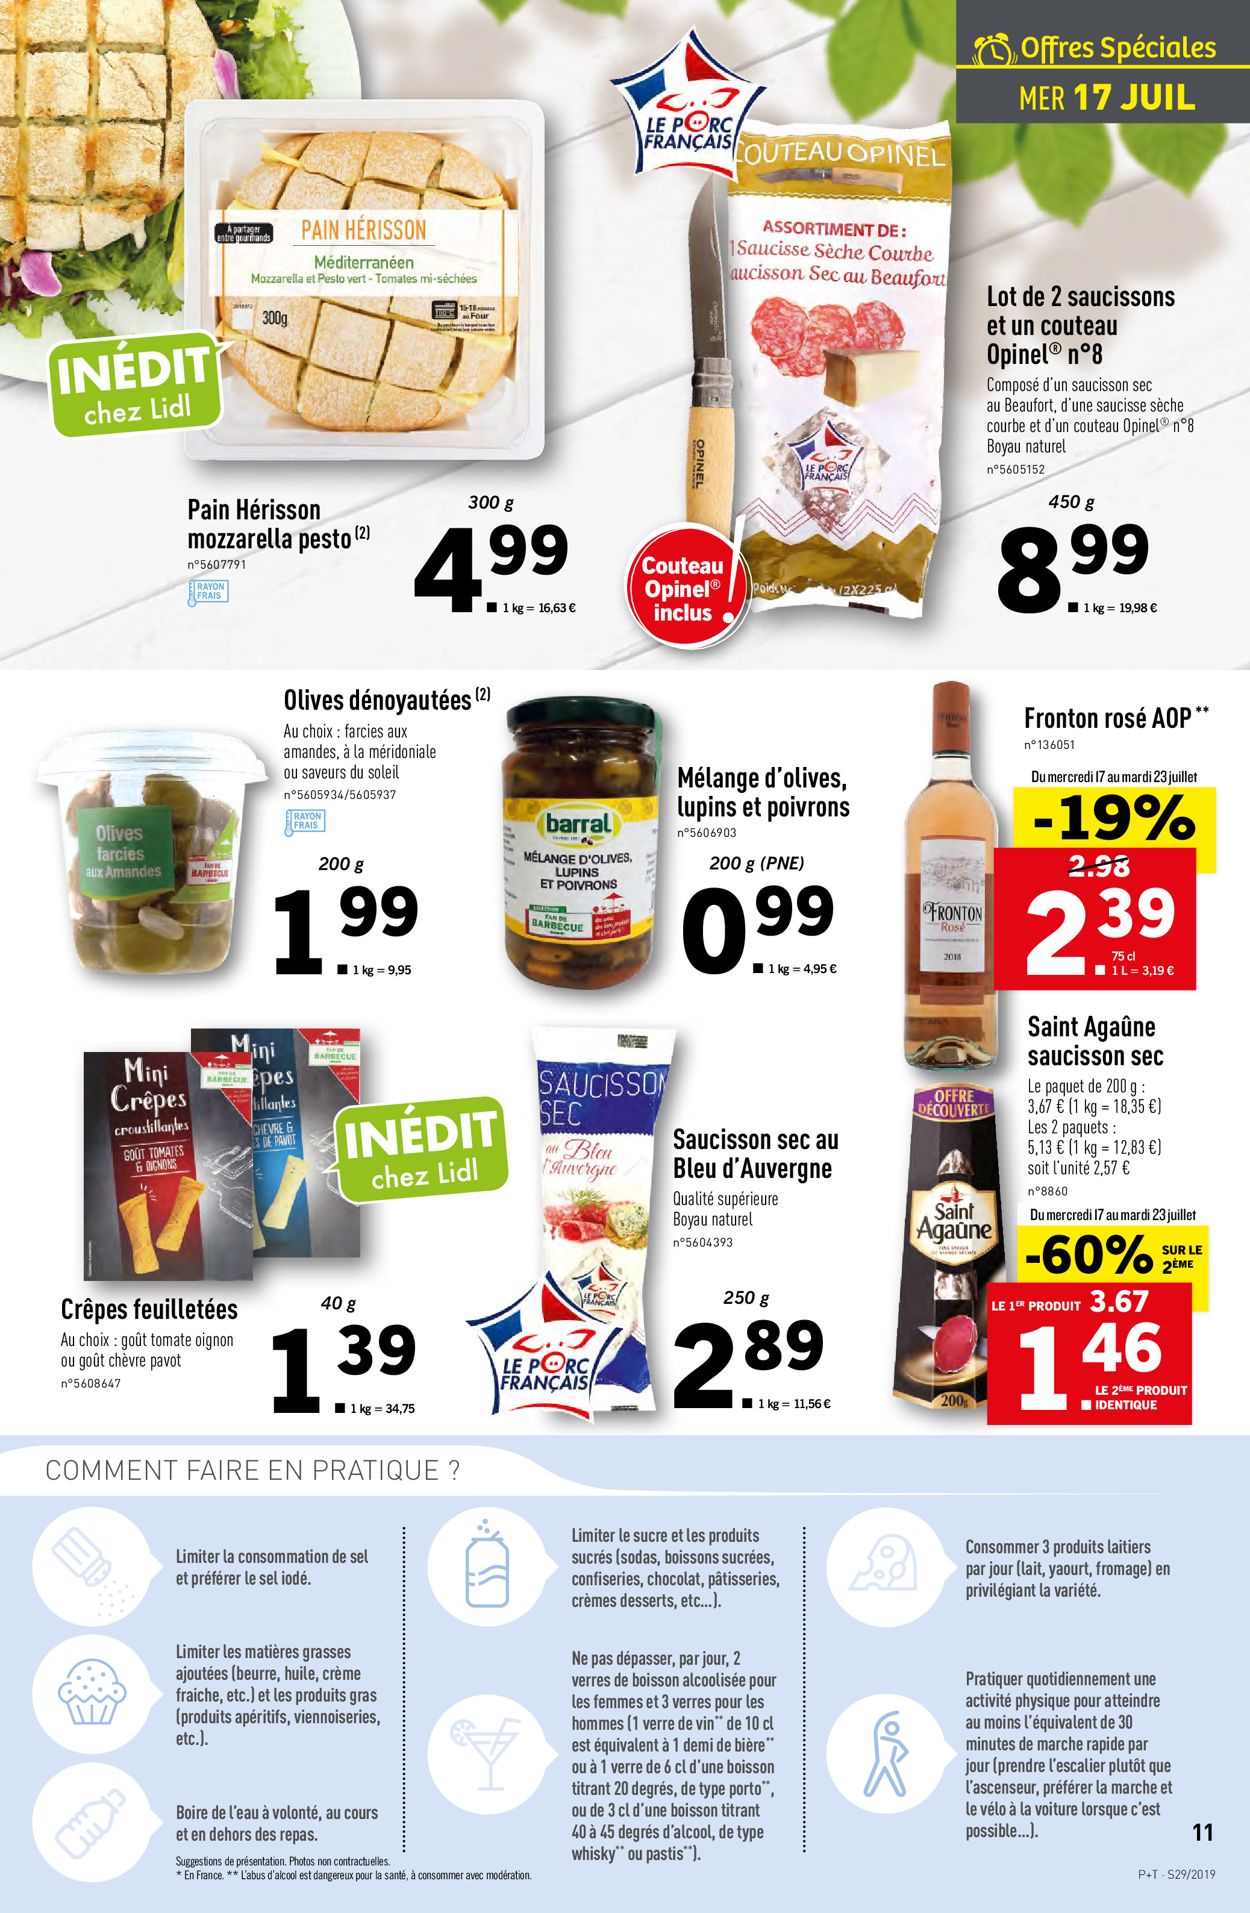 Lidl Catalogue - 17.07-23.07.2019 (Page 11)